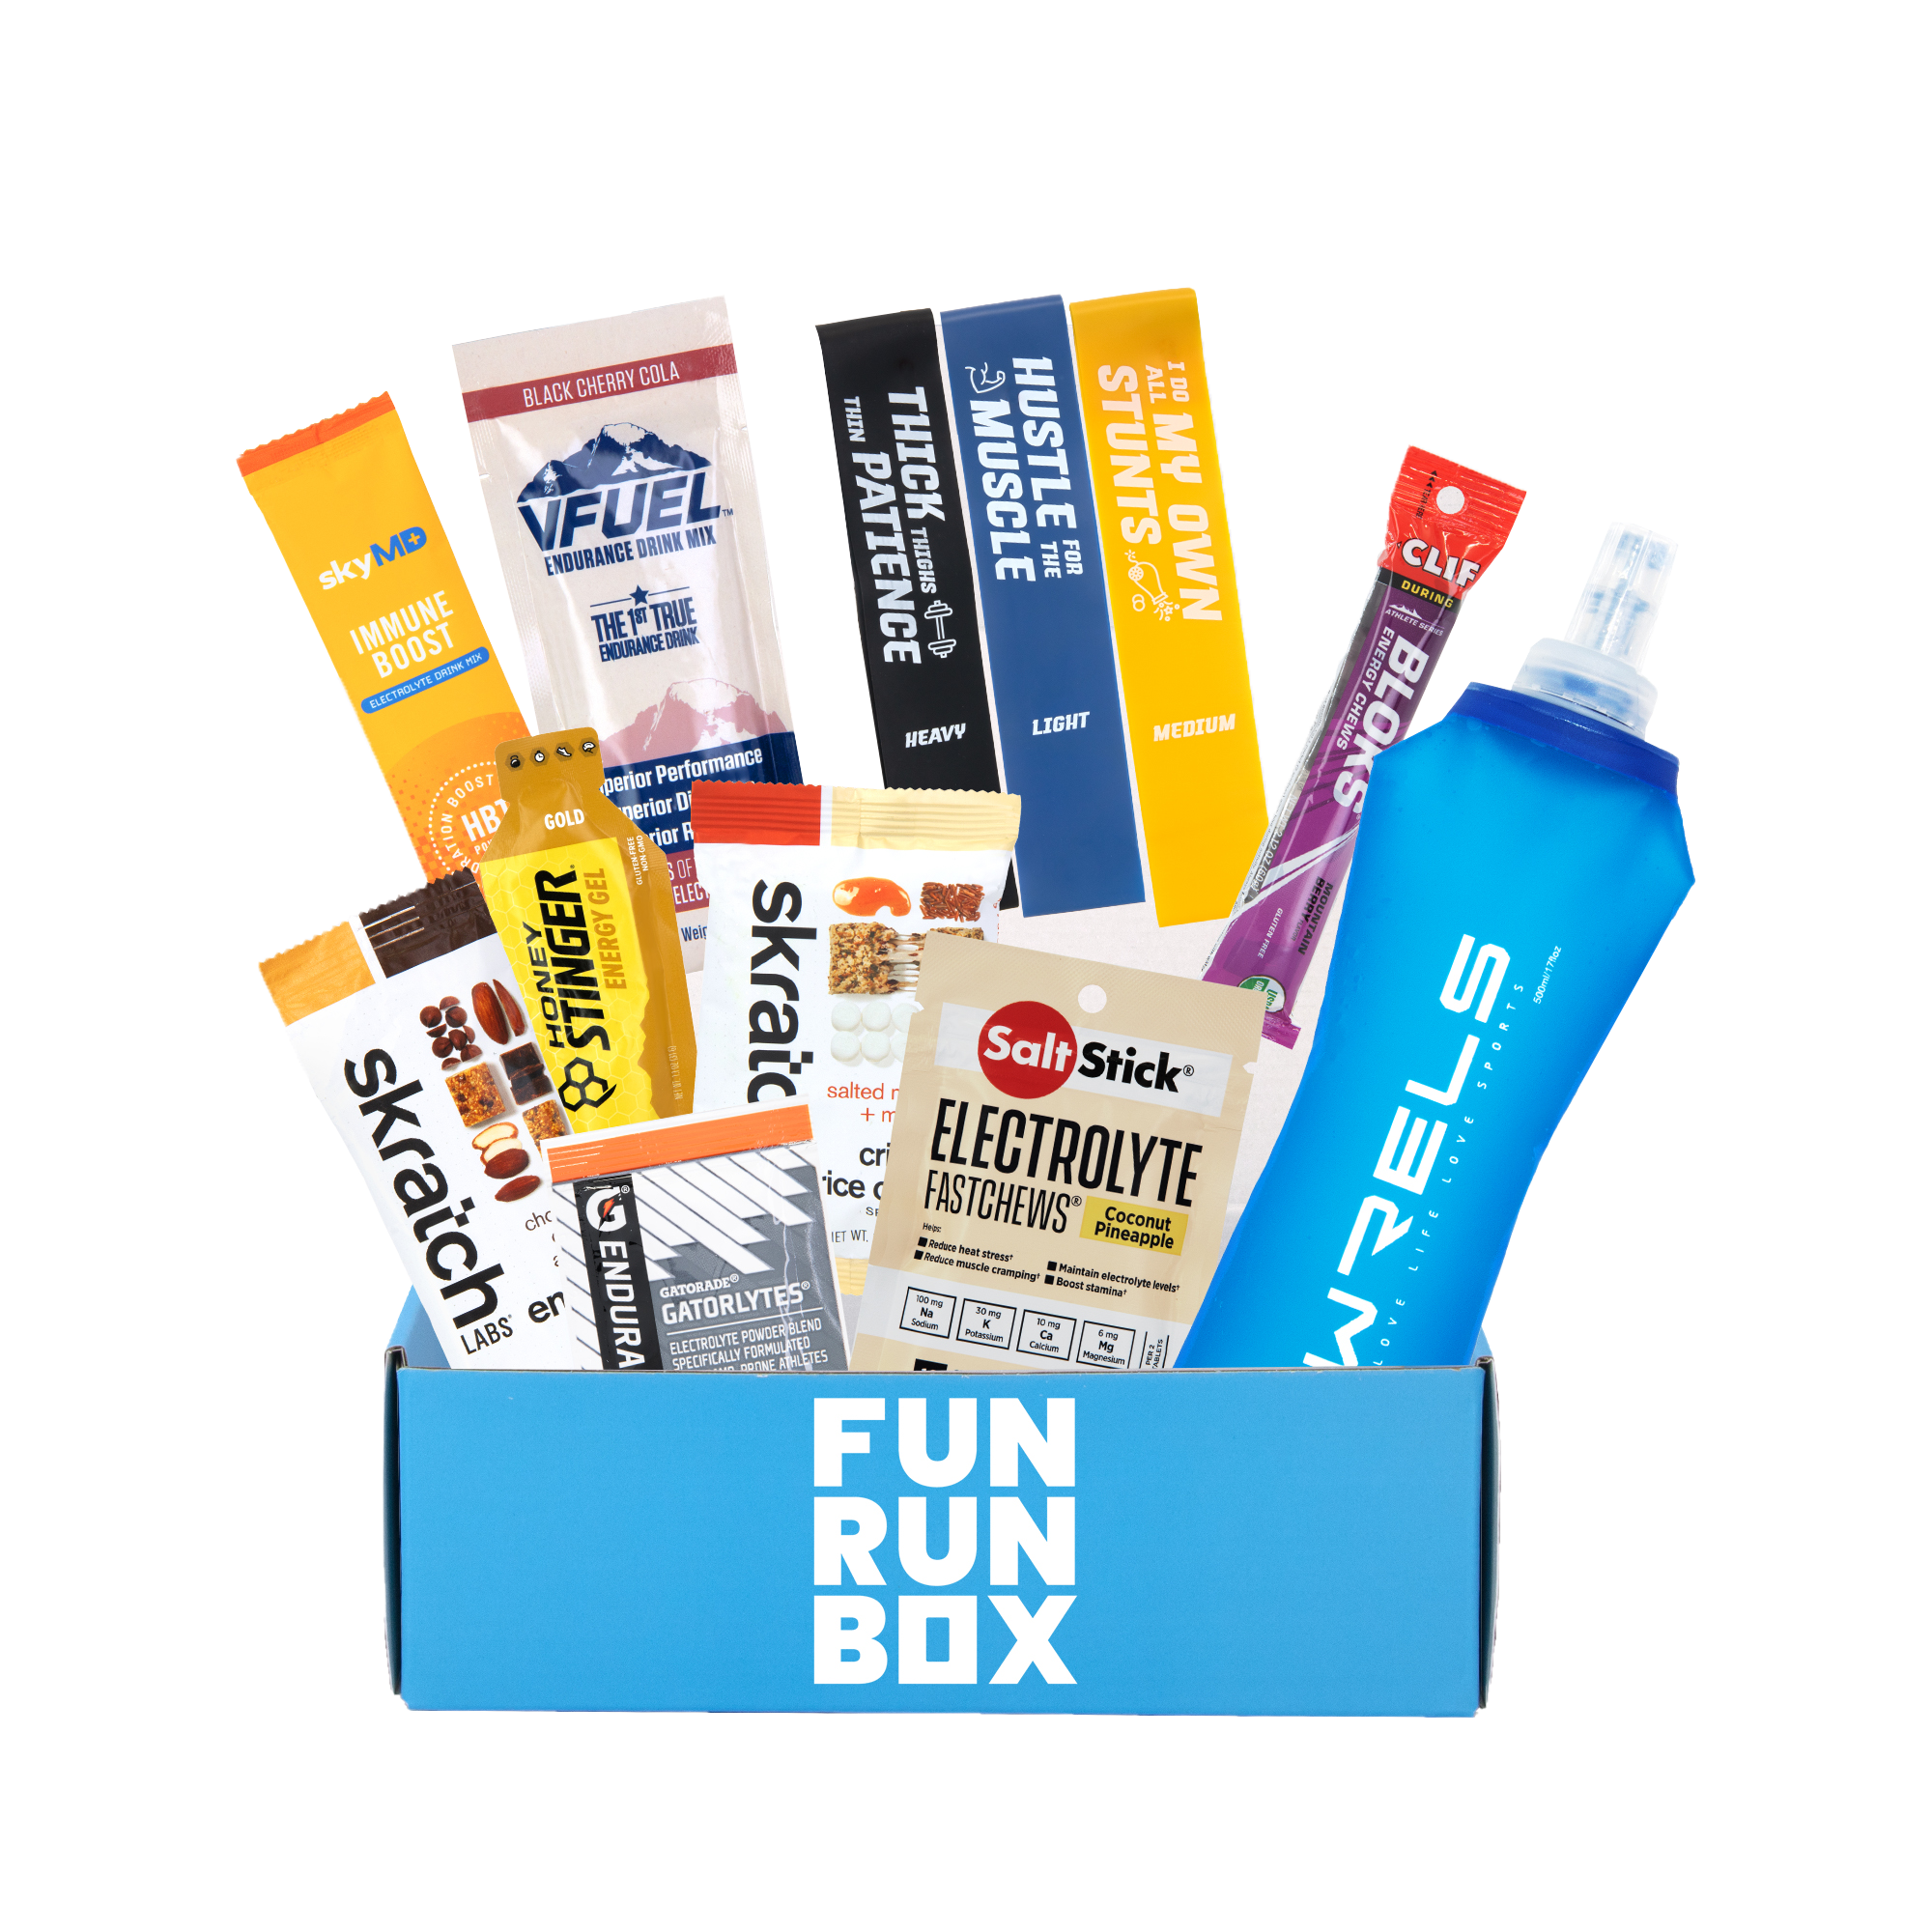 FRB Monthly Runners Box - 6 Month Plan